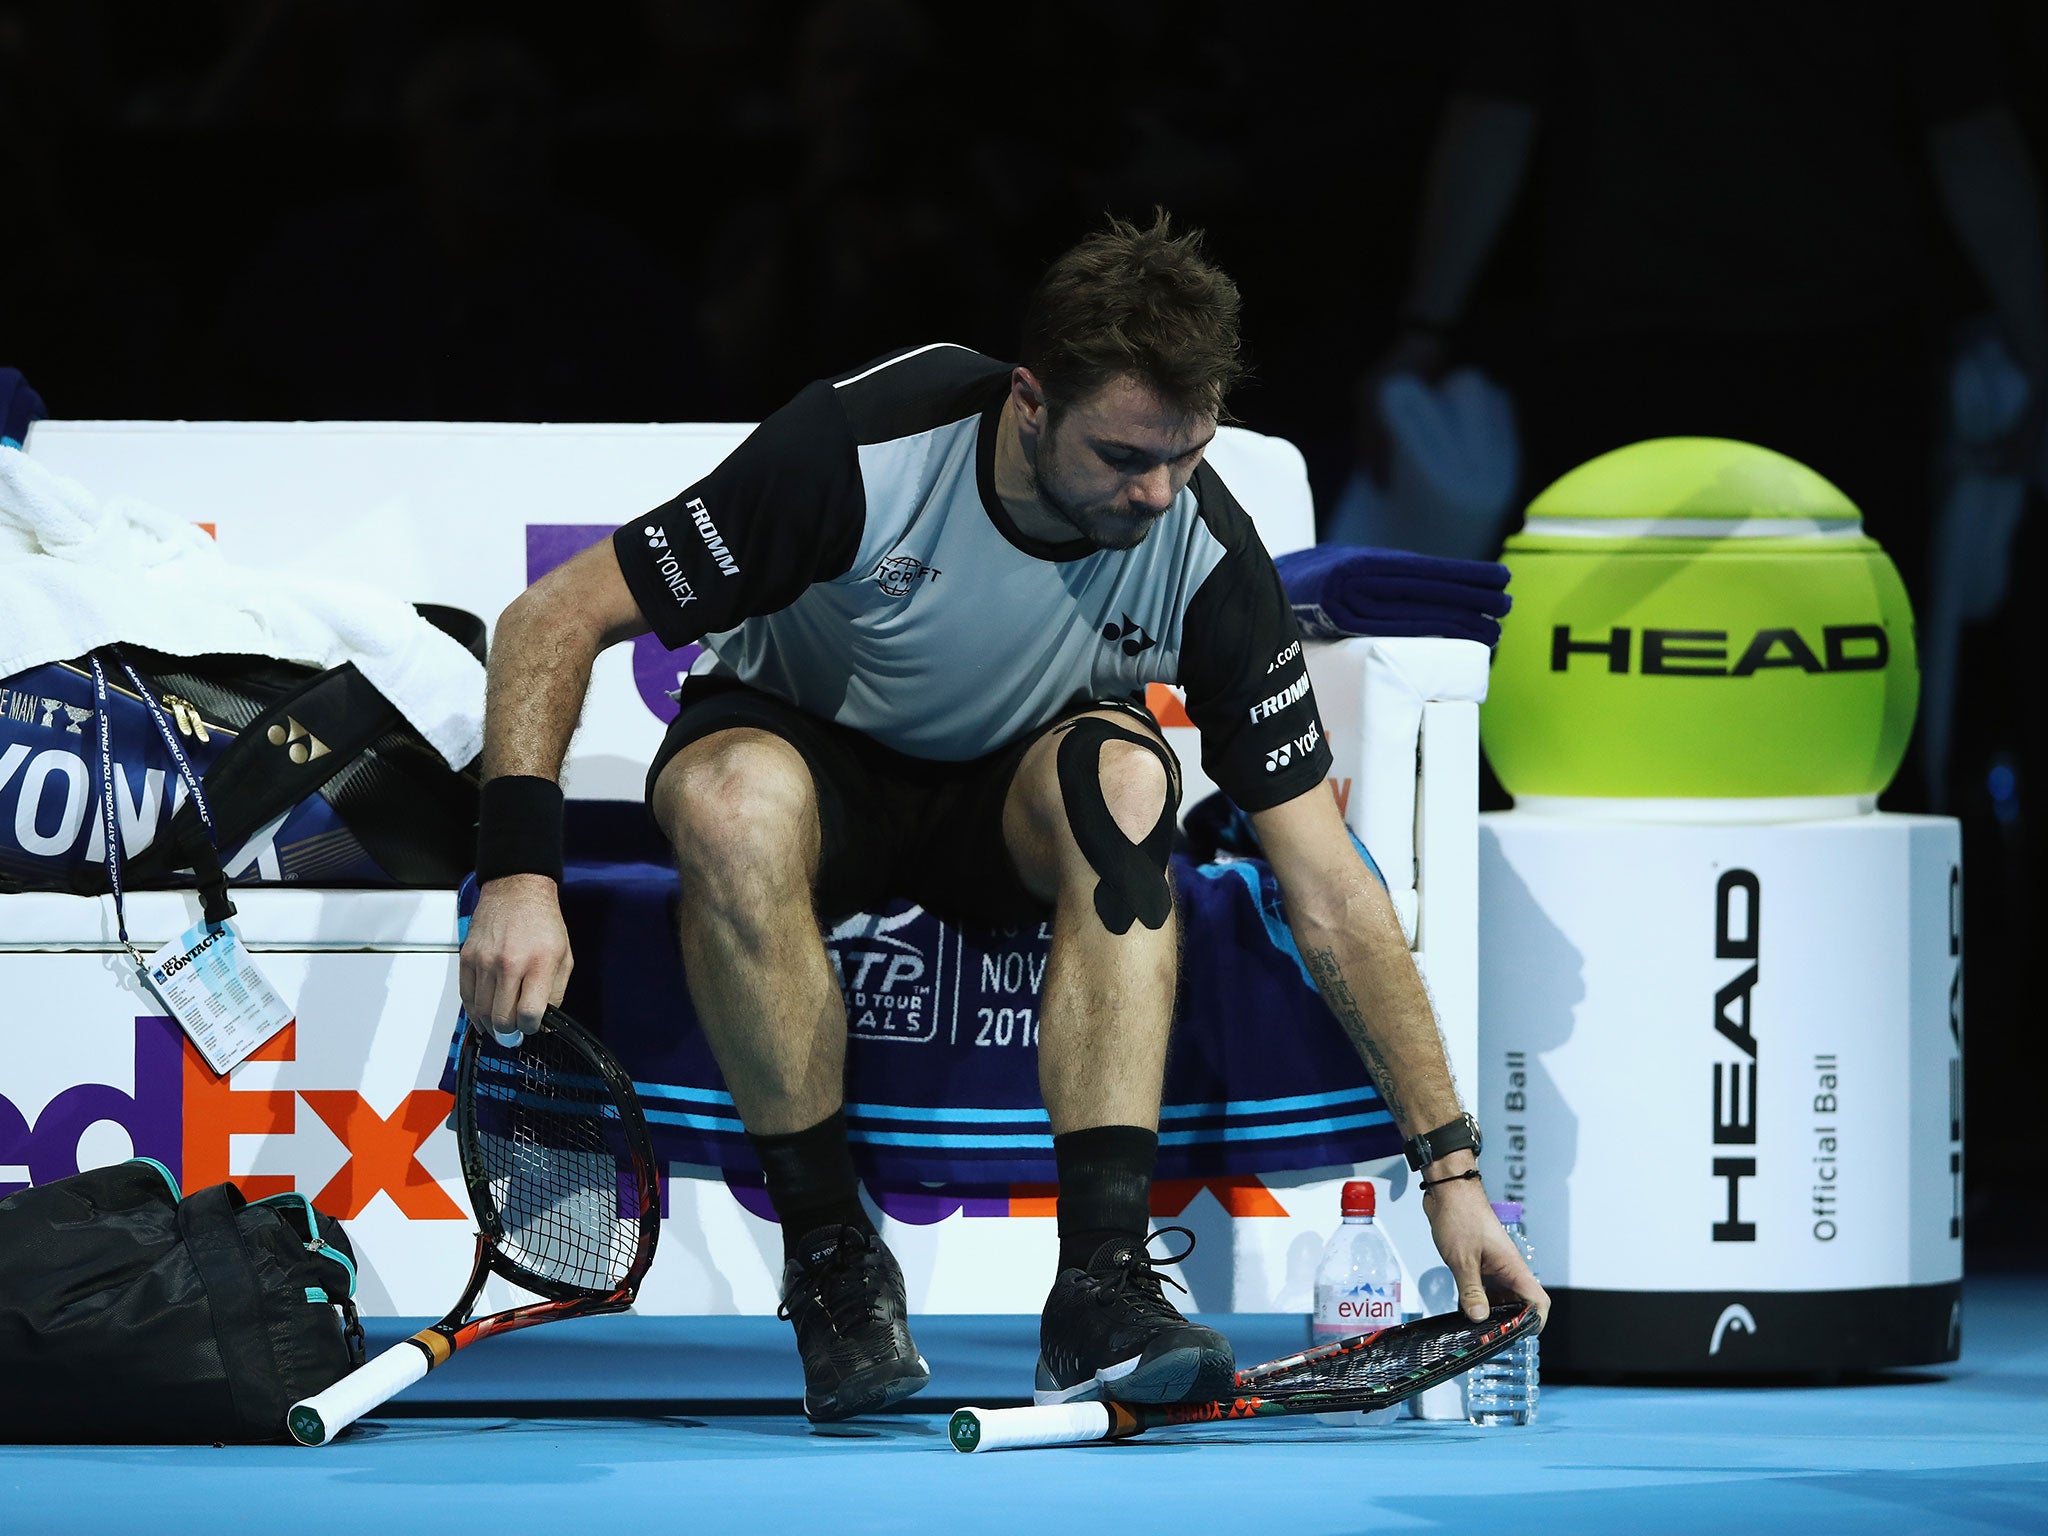 Wawrinka smashed his racket in frustration early in the second set